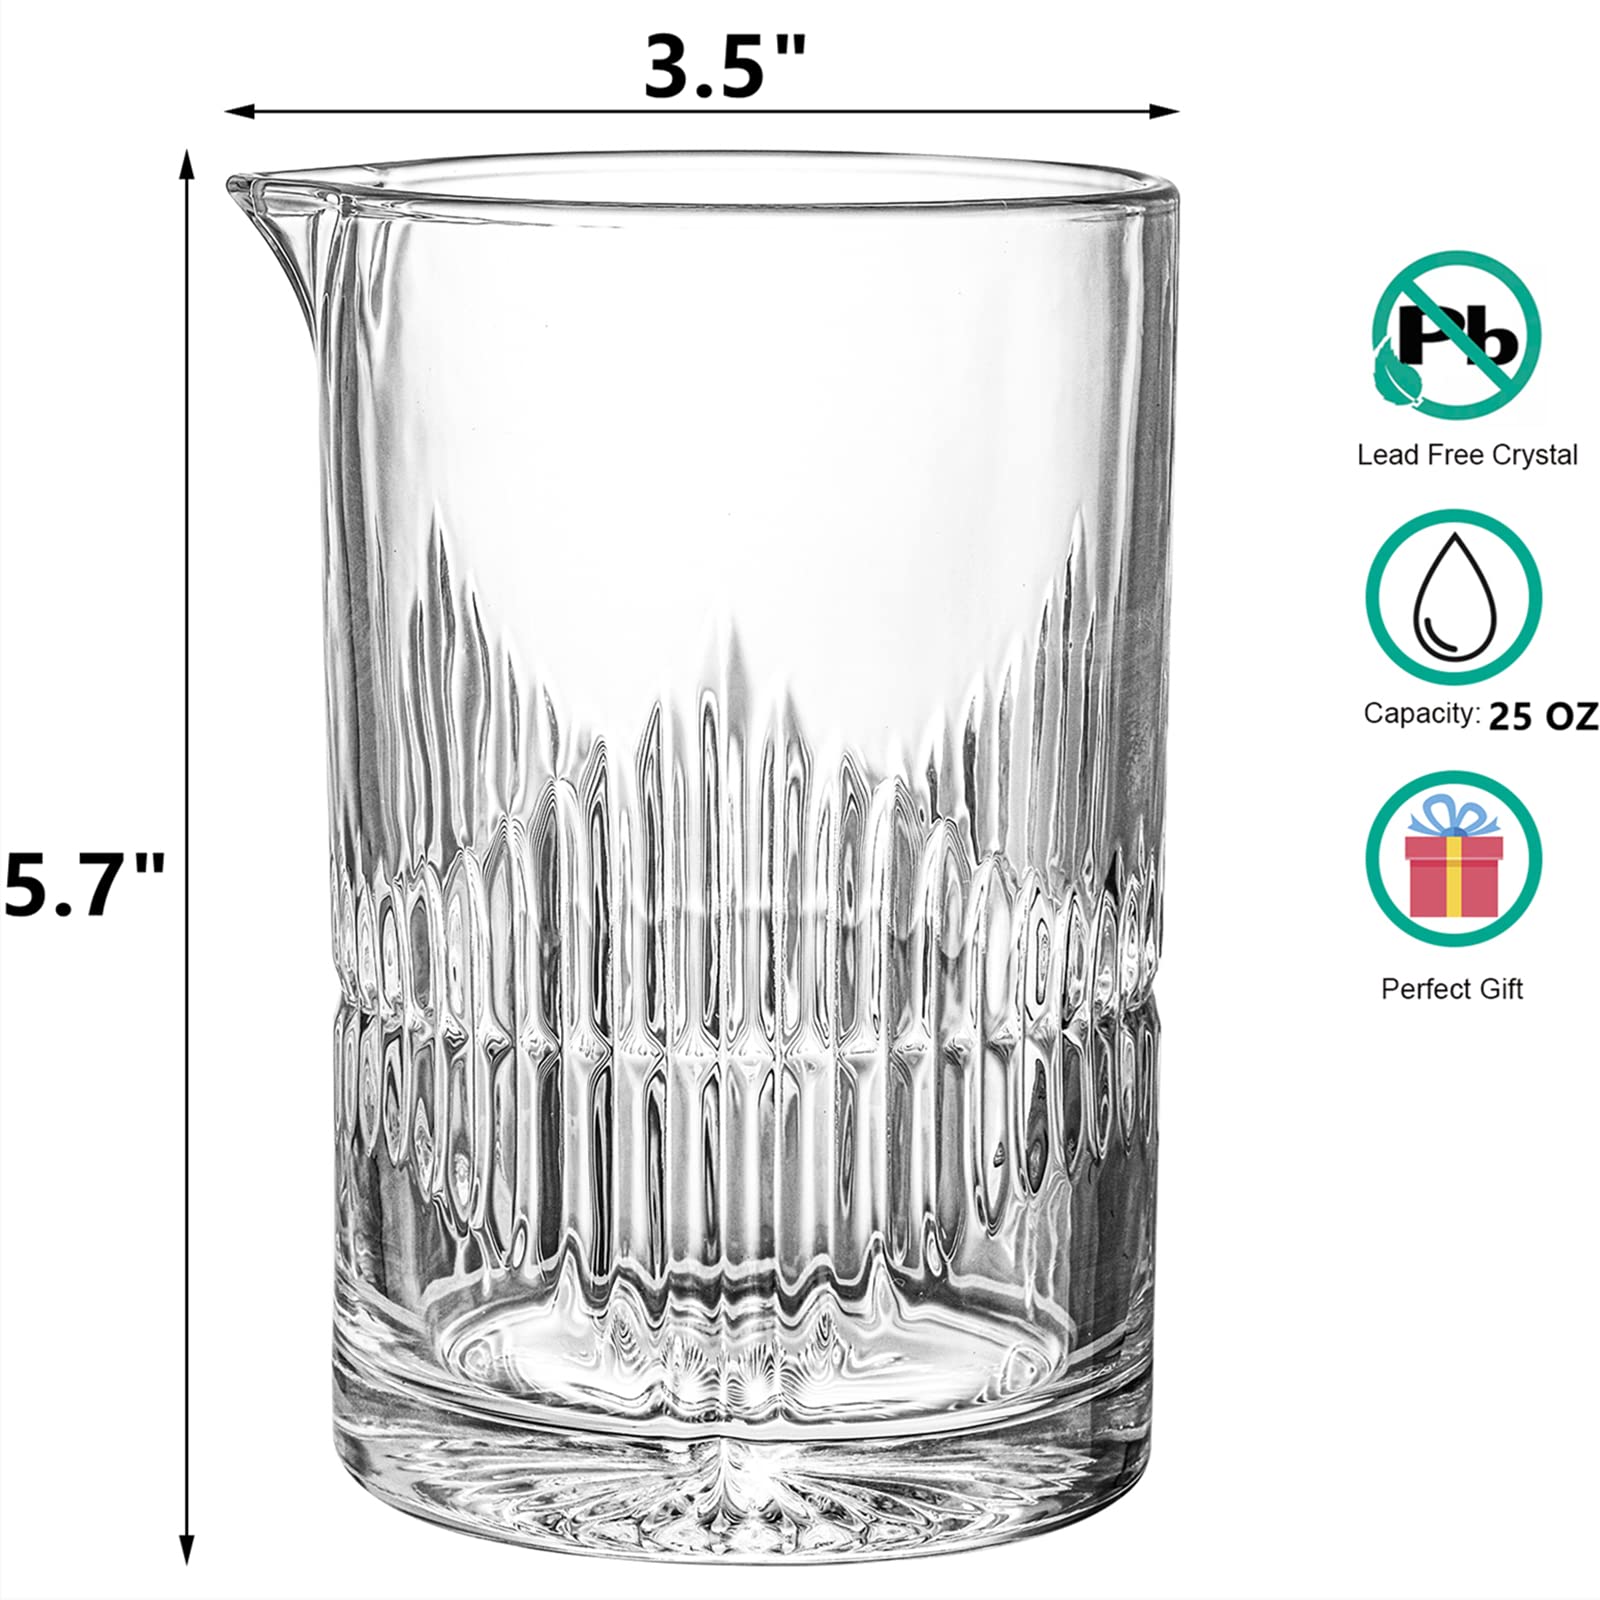 DEAYOU 2 Pack 25 OZ Stirring Glass, Glass Shaker with Weighted Bottom for Bartender, Home, Old Fashioned